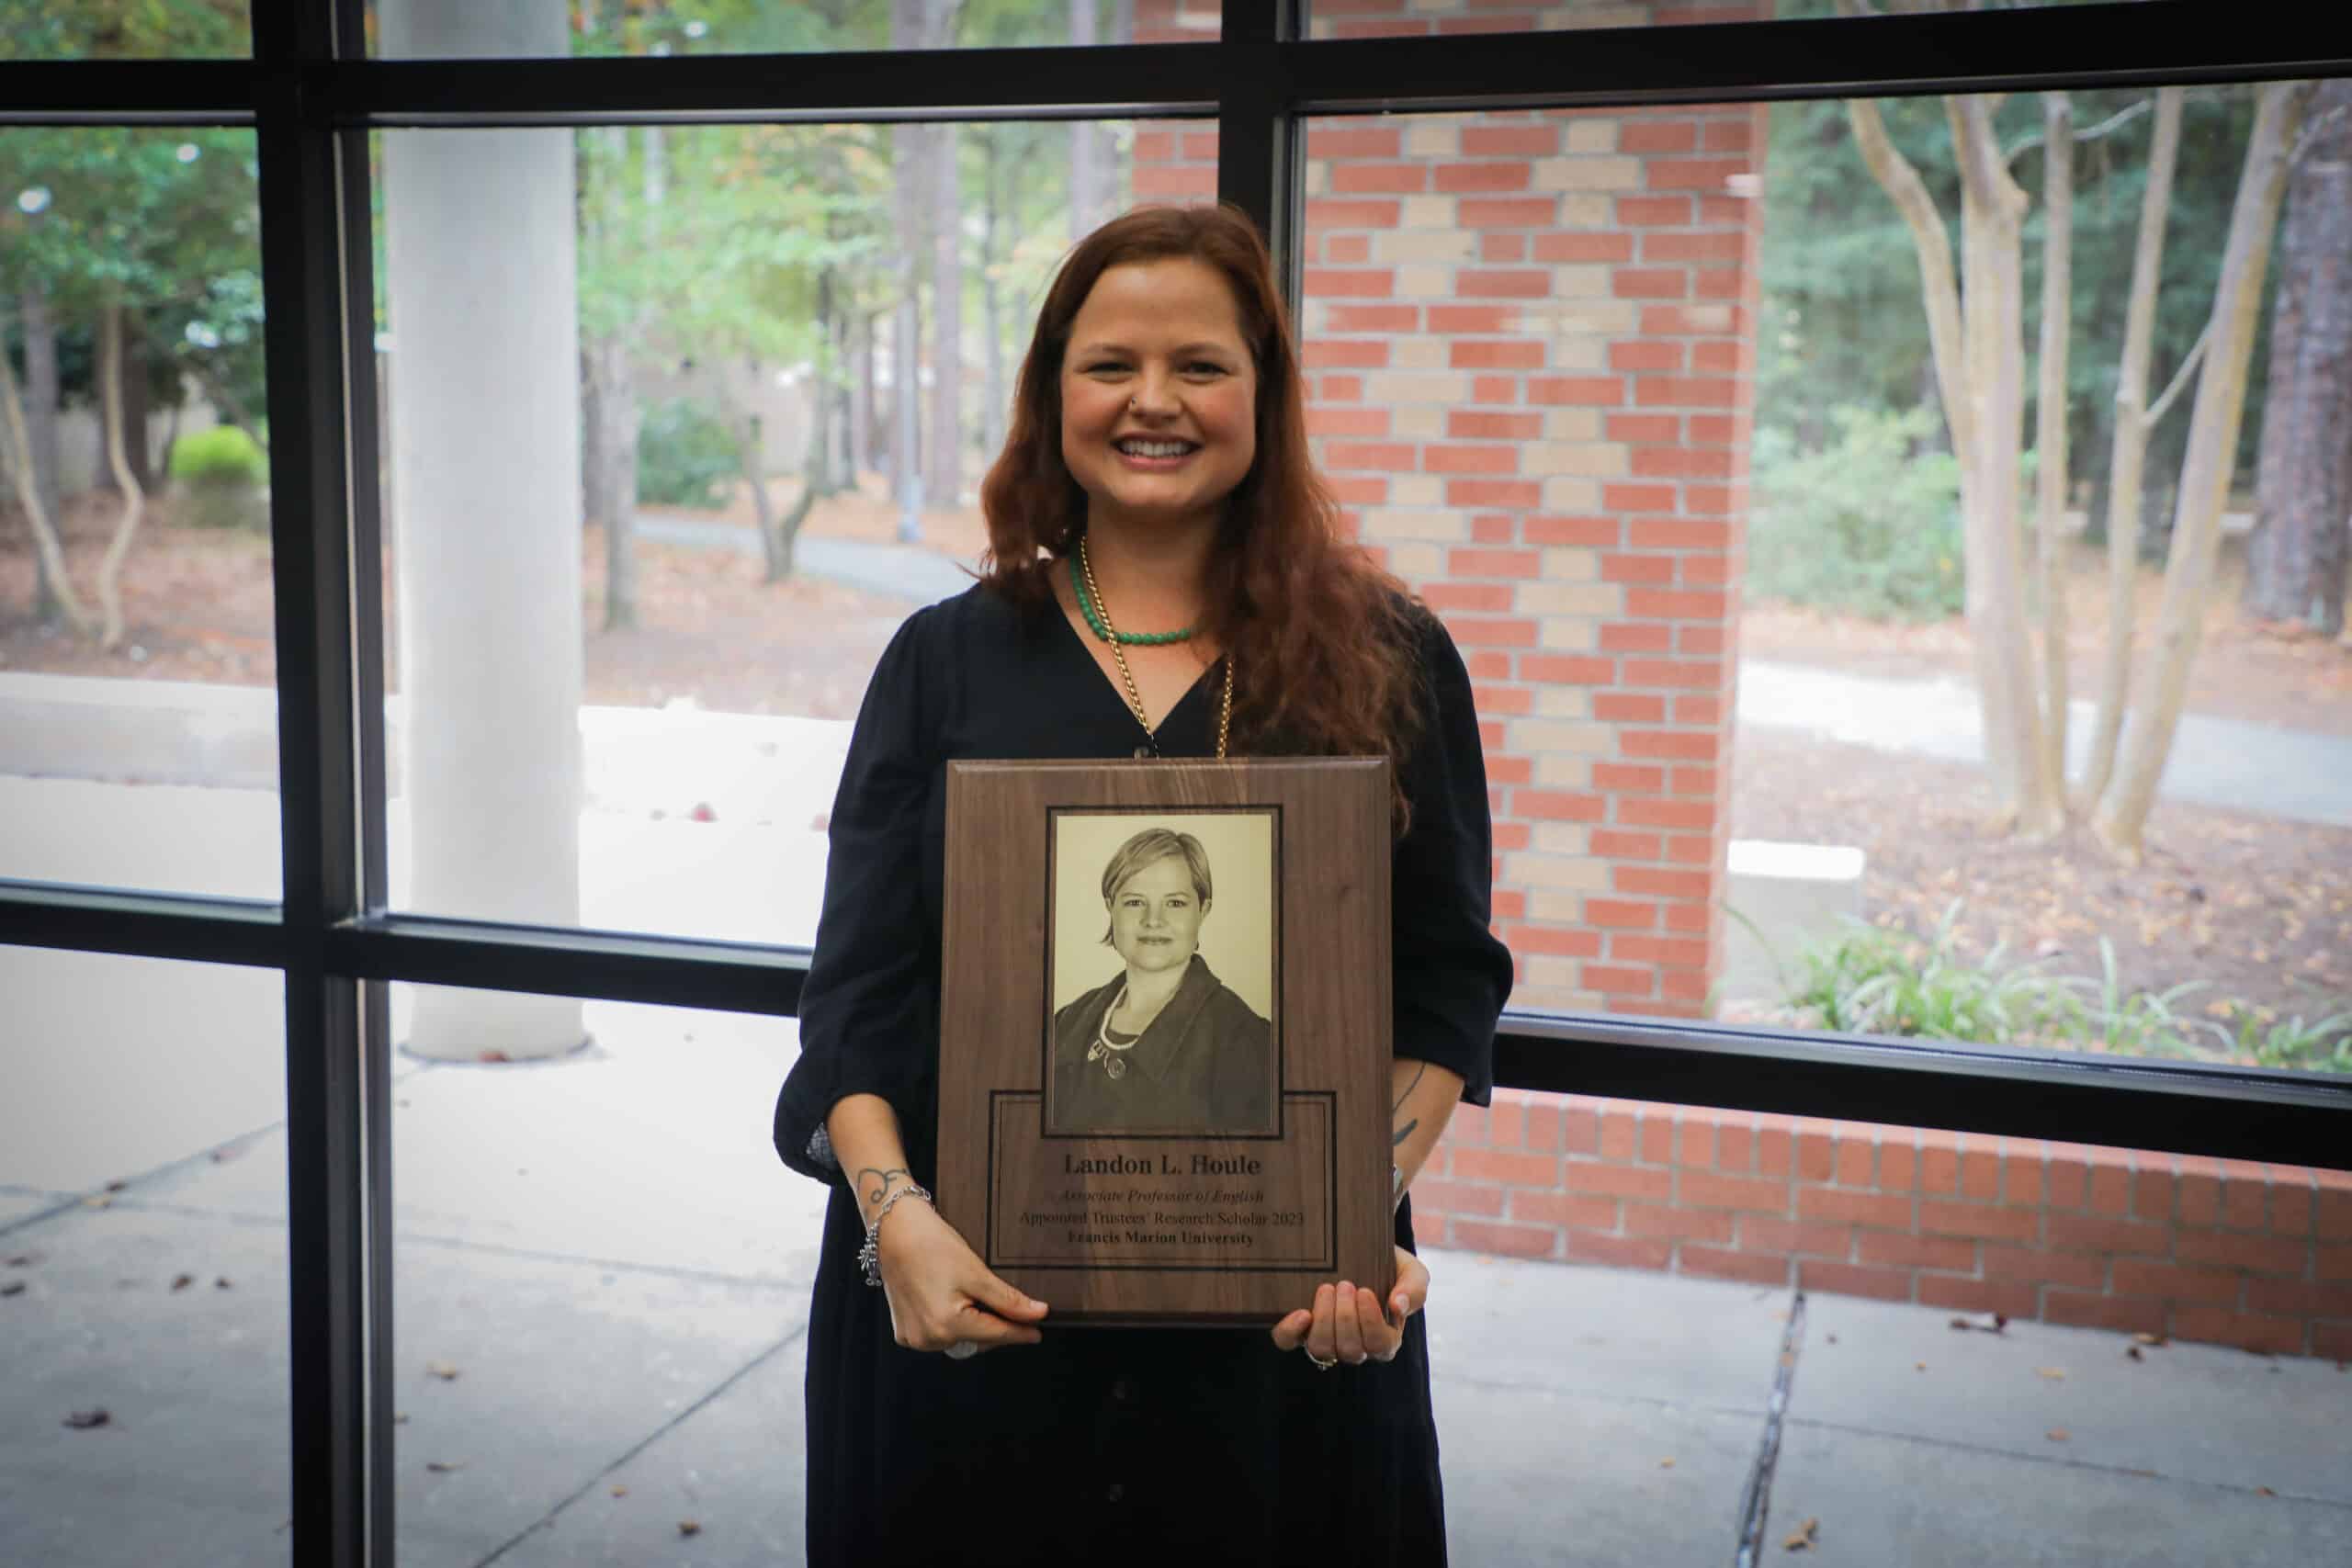 Houle becomes FMU’s newest Trustee Research Scholar